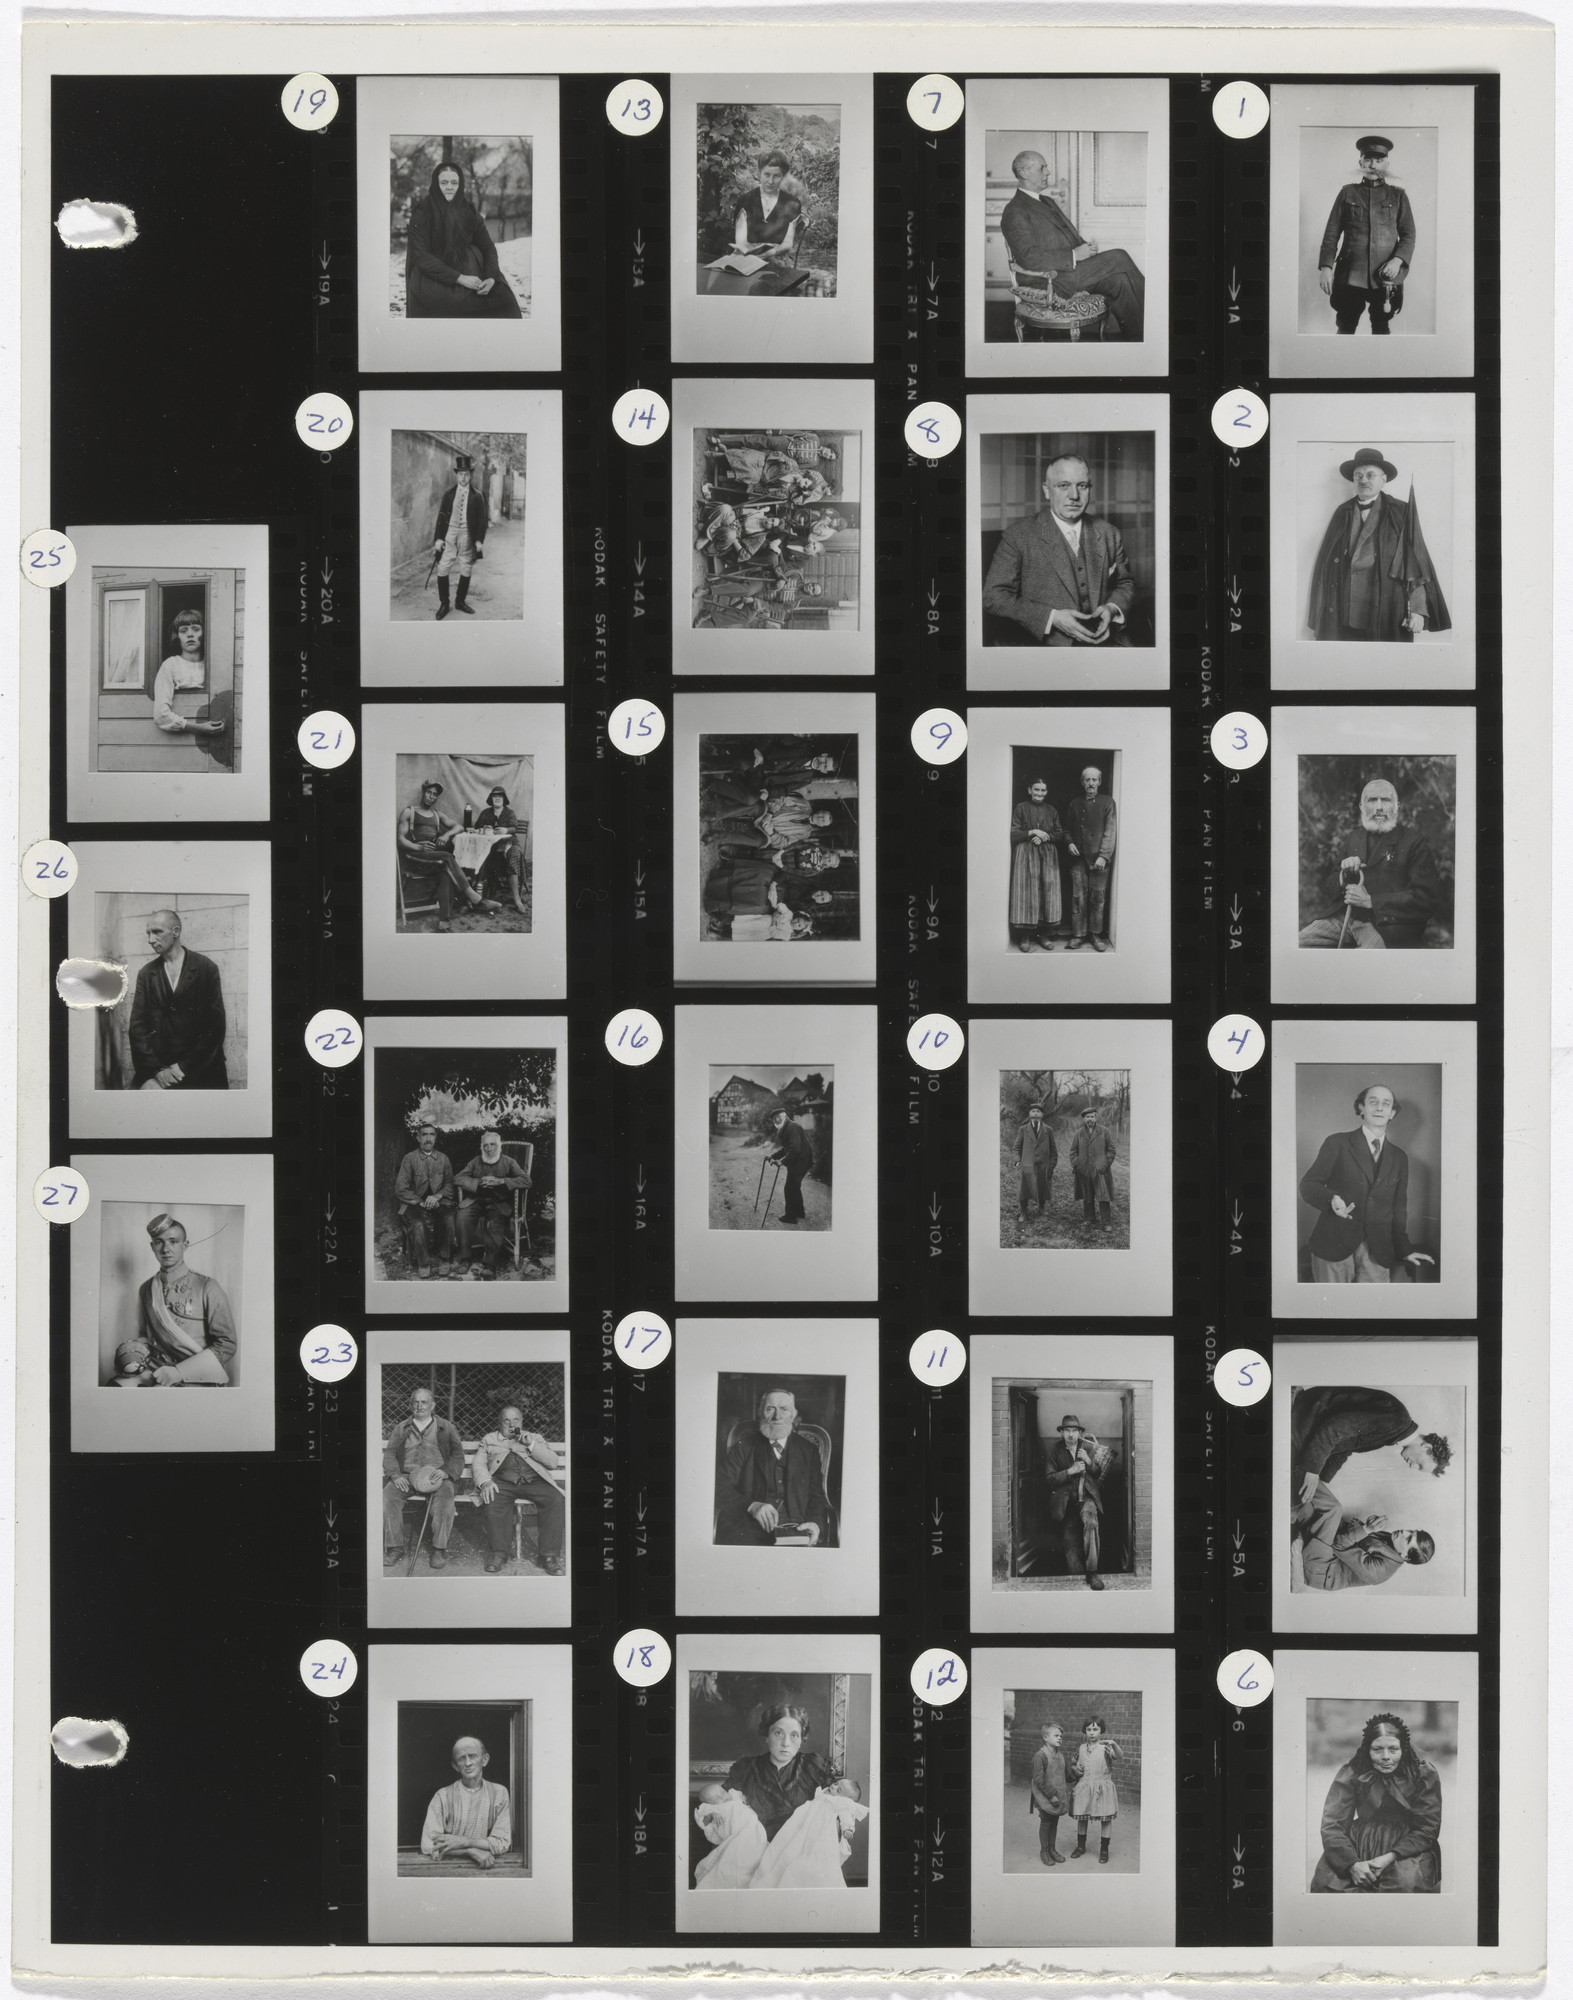 Contact sheet of artwork included the exhibition "August Sander (1876-1964)" | MoMA